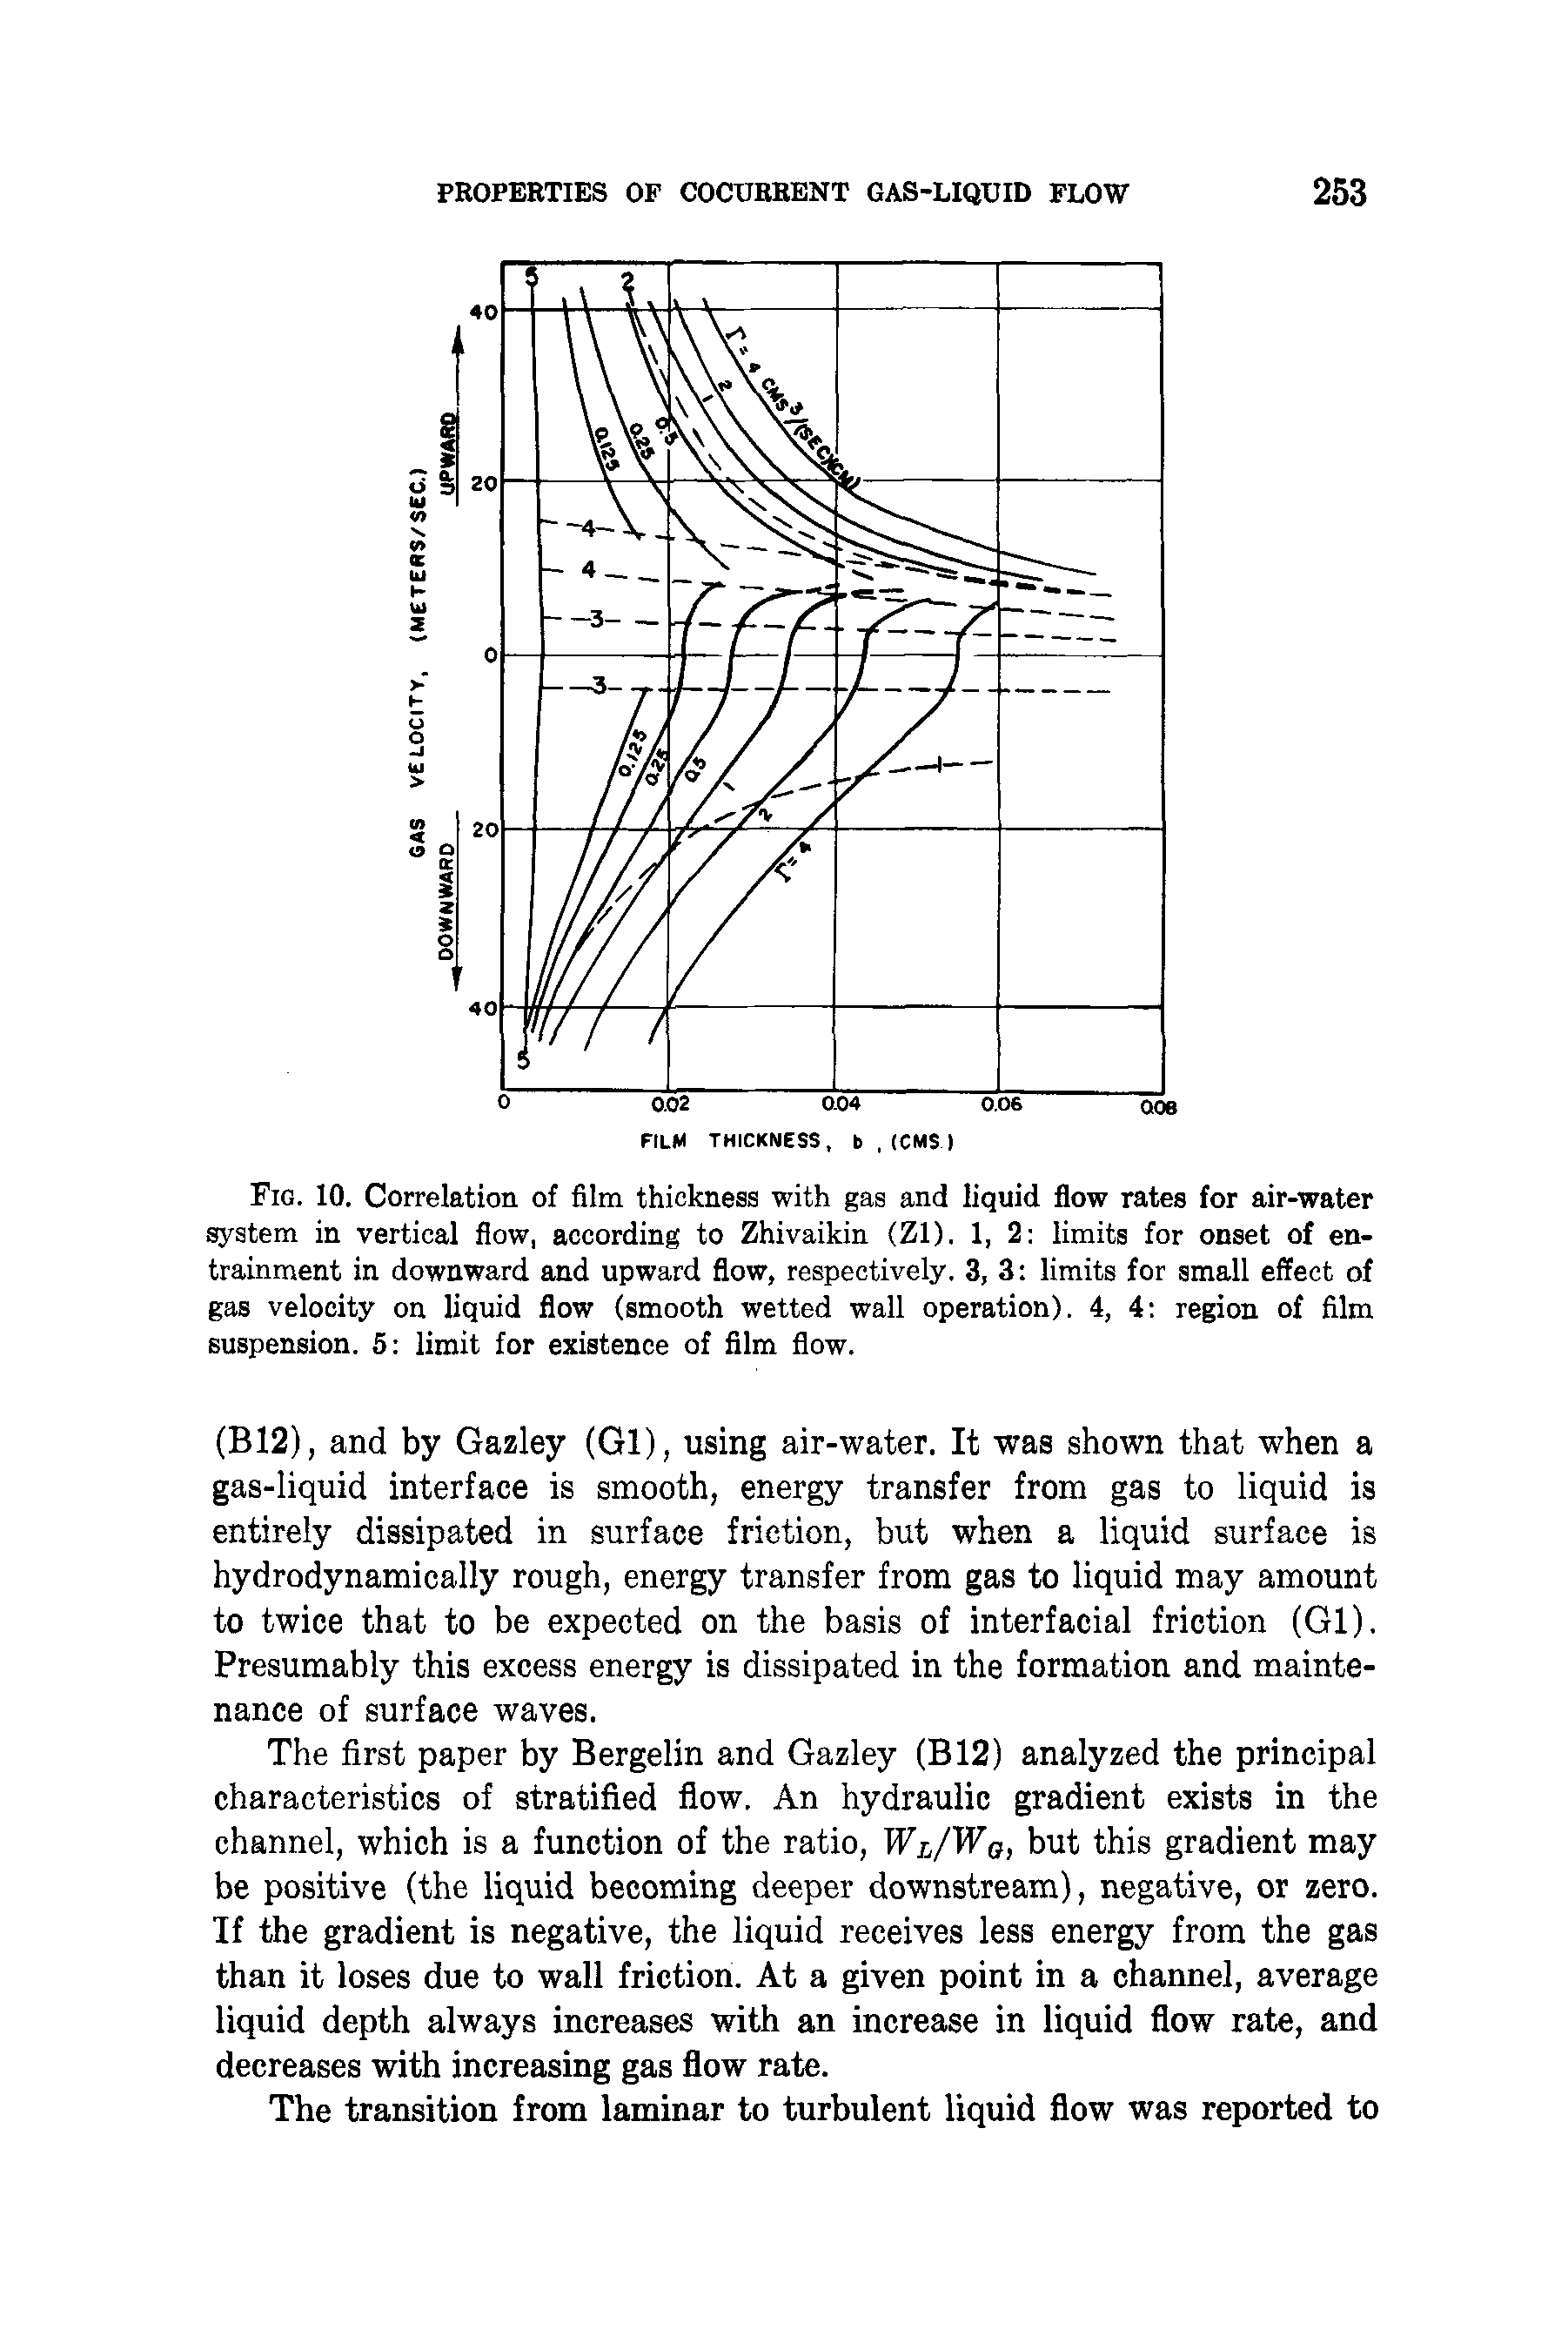 Fig. 10. Correlation of film thickness with gas and liquid flow rates for air-water system in vertical flow, according to Zhivaikin (Zl). 1, 2 limits for onset of entrainment in downward and upward flow, respectively. 3, 3 limits for small effect of gas velocity on liquid flow (smooth wetted wall operation). 4, 4 region of film suspension. 5 limit for existence of film flow.